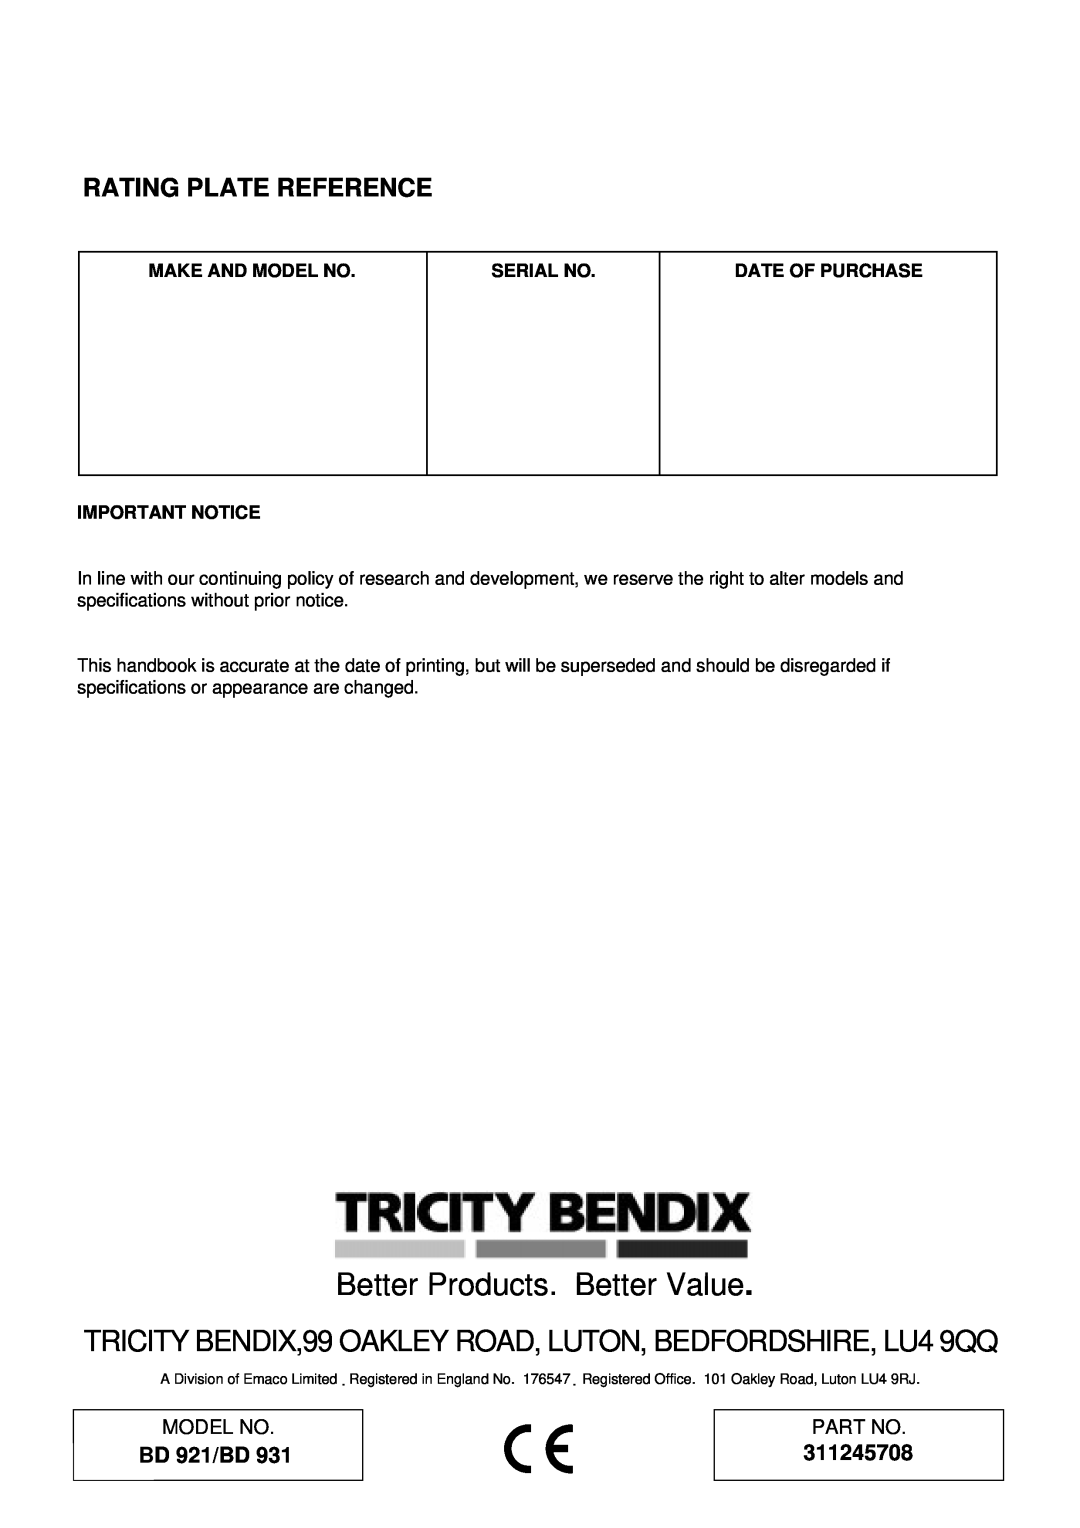 Tricity Bendix Rating Plate Reference, 311245708, Better Products. Better Value, BD 921/BD, Make And Model No 